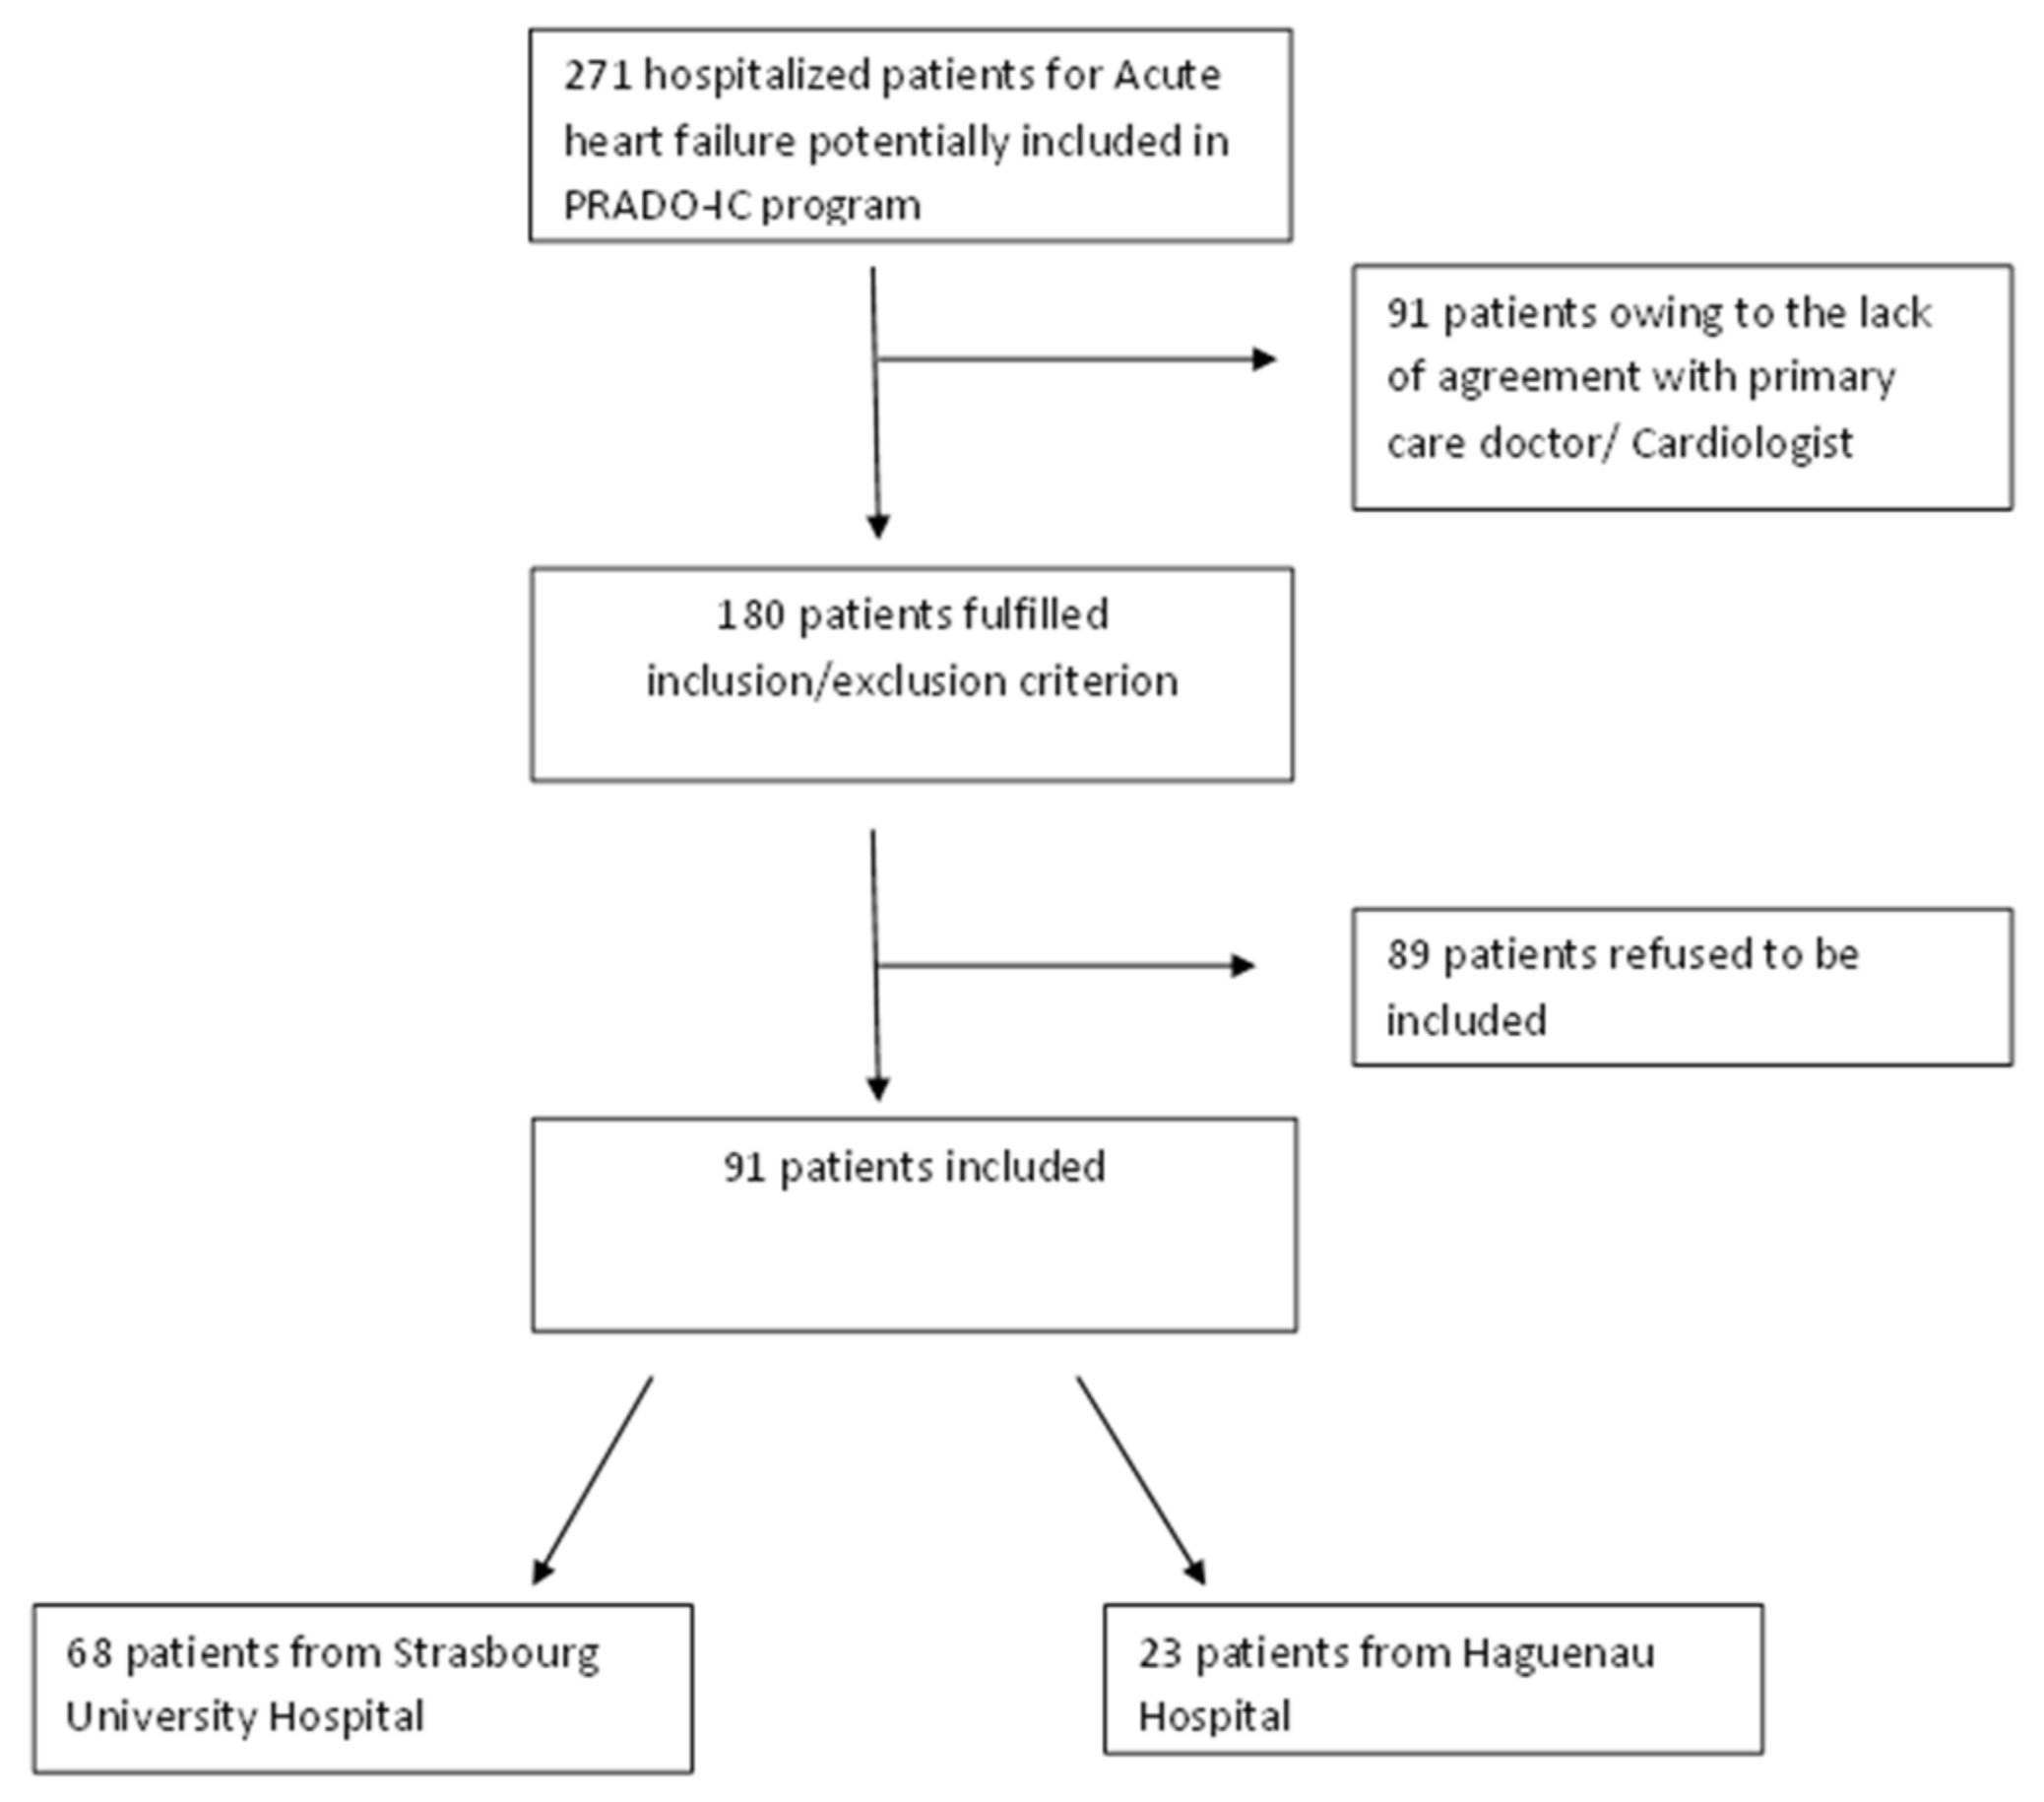 Jcm Free Full Text Evaluation Of The French National Program On Home Return Of Patients With Chronic Heart Failure Prado Ic Pilot Study Of 91 Patients During Its Deployment In The Bas